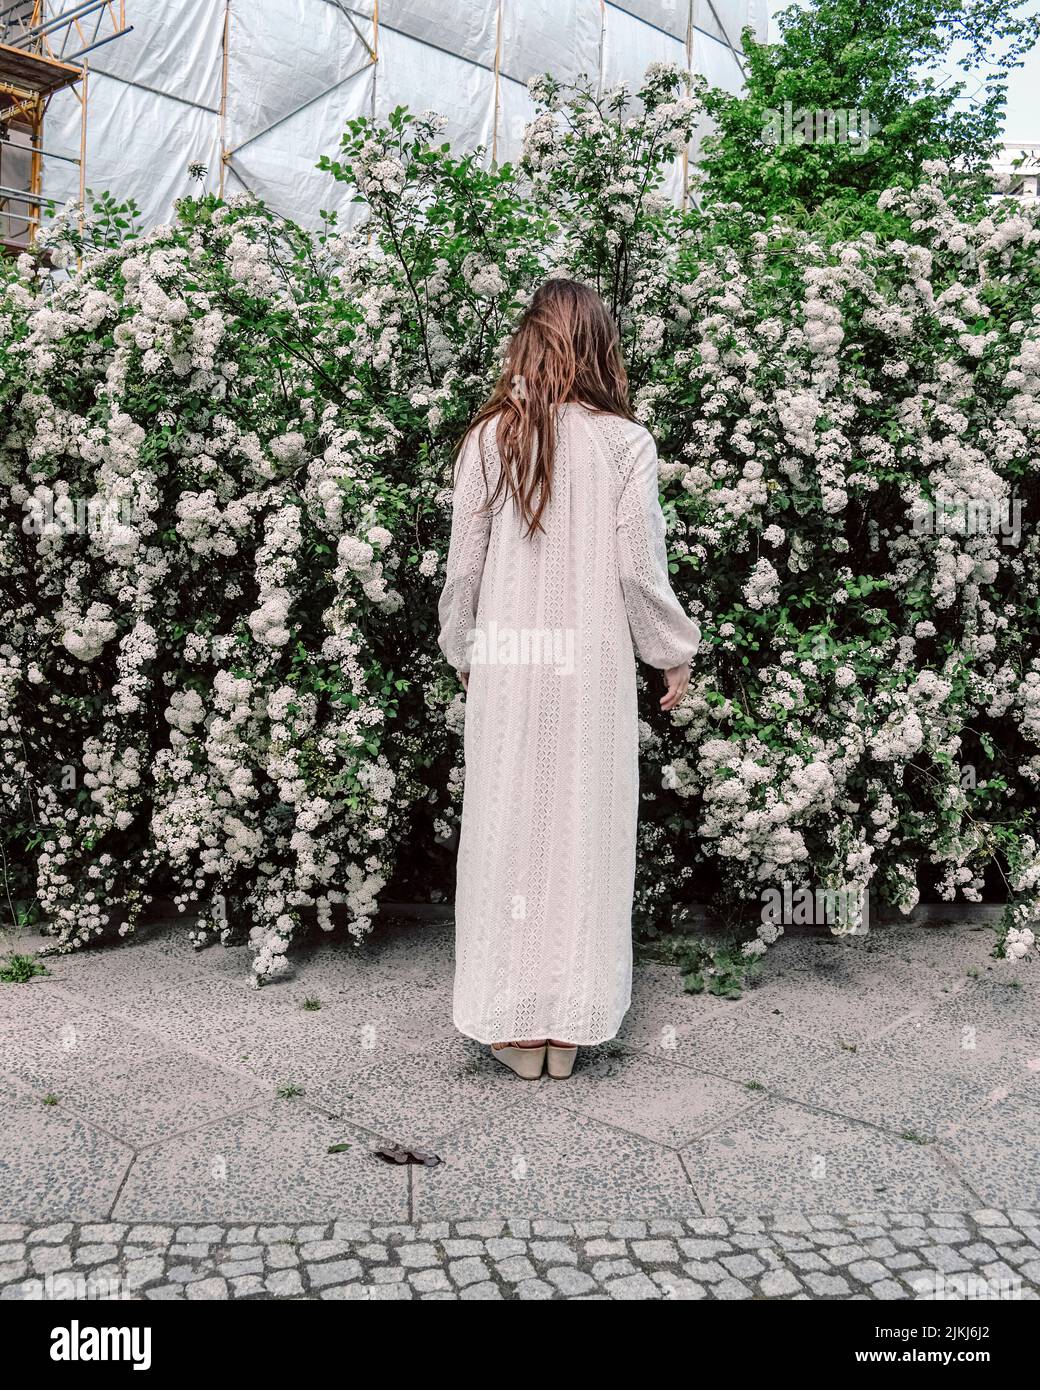 woman, white dress, from behind, scalding bush Stock Photo